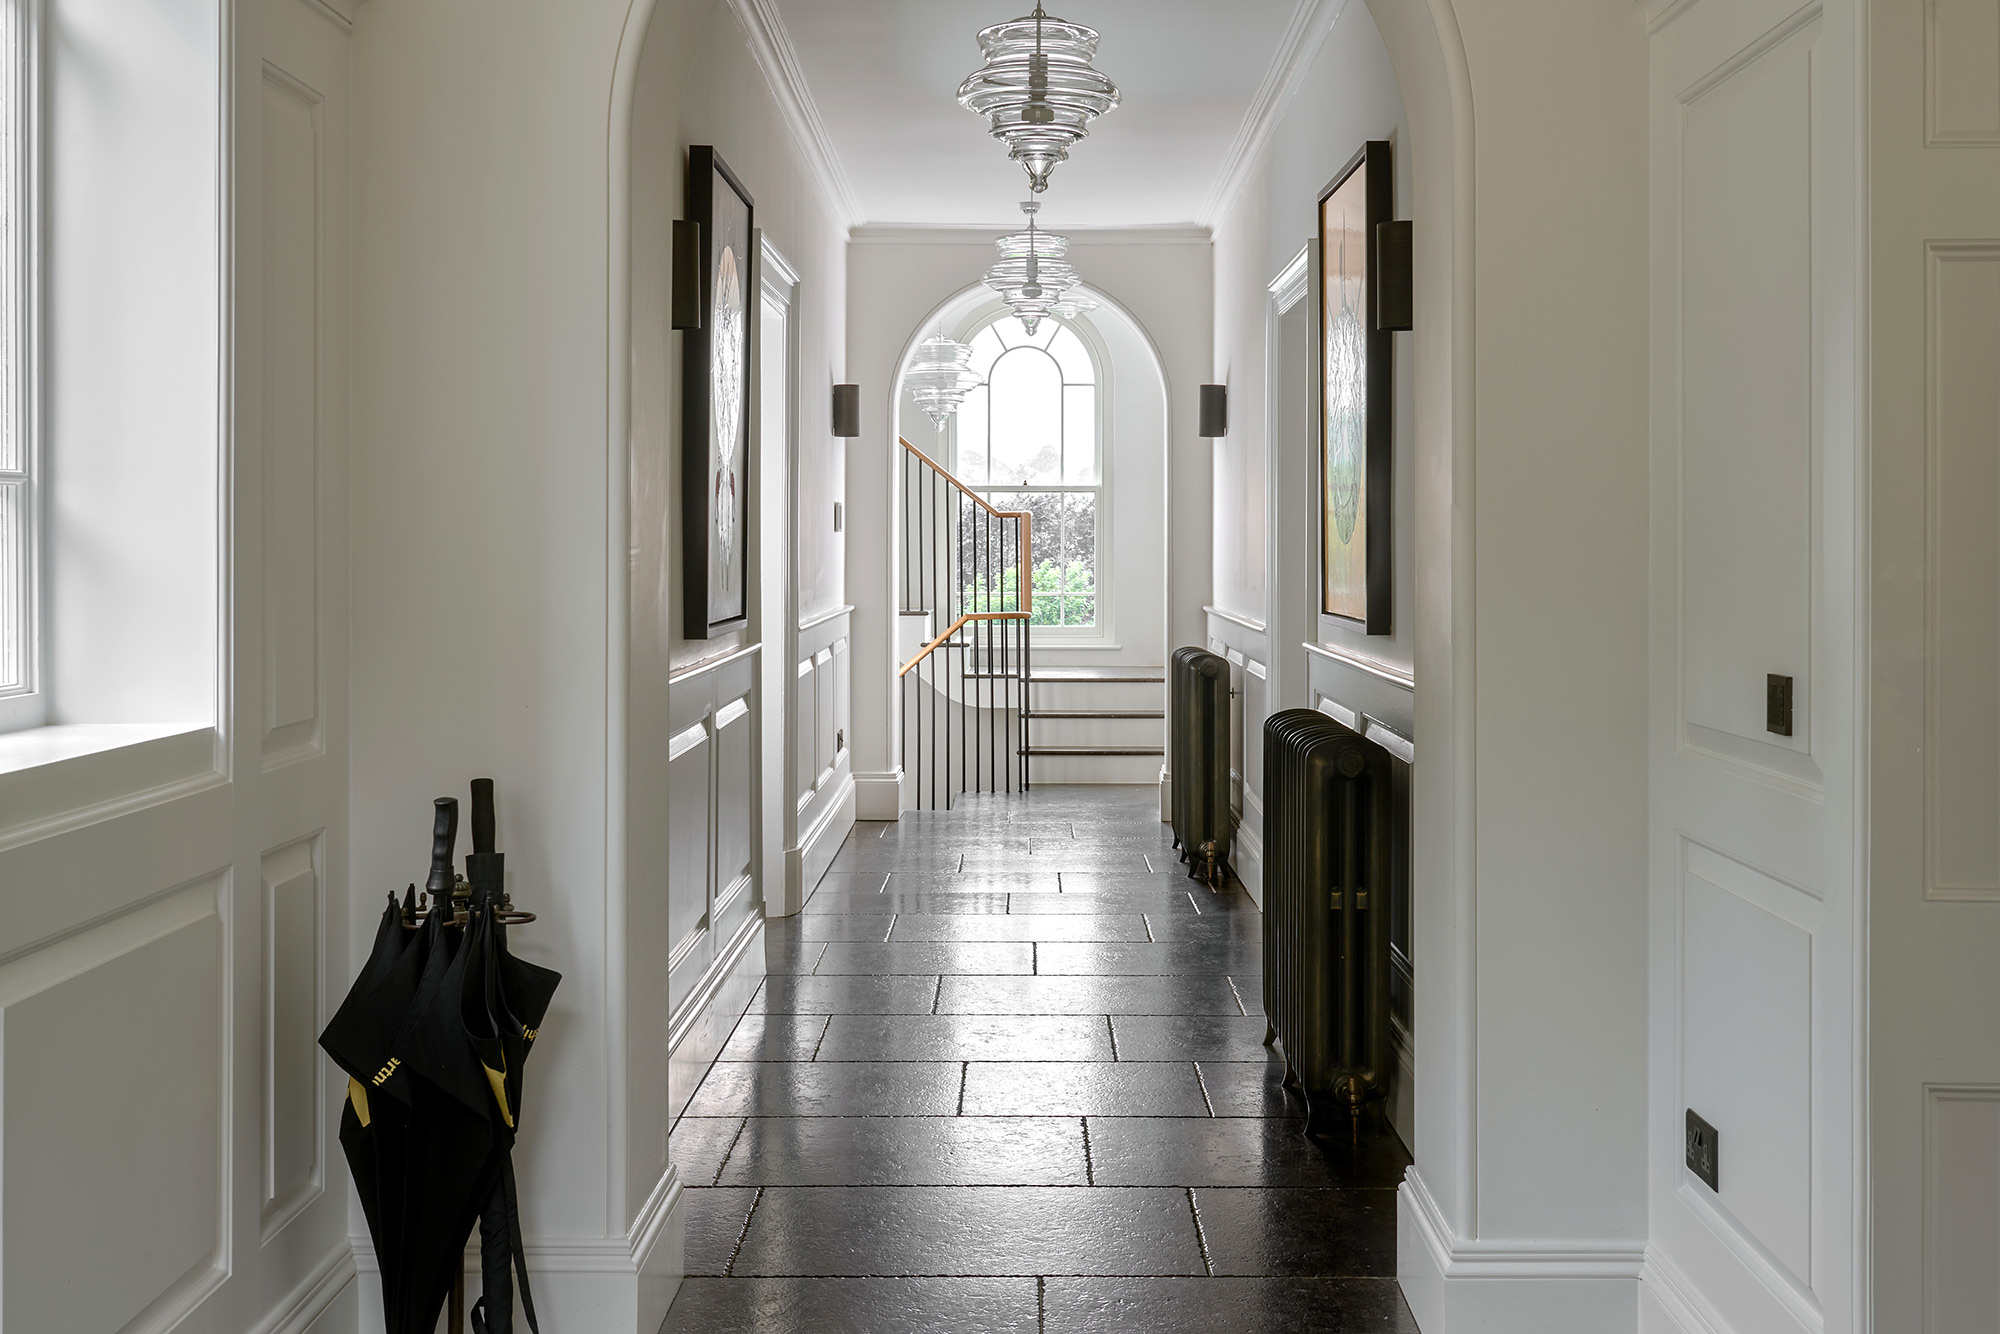 Hallway interior - Georgian renovation and extension by KM Grant Guildford, Surrey